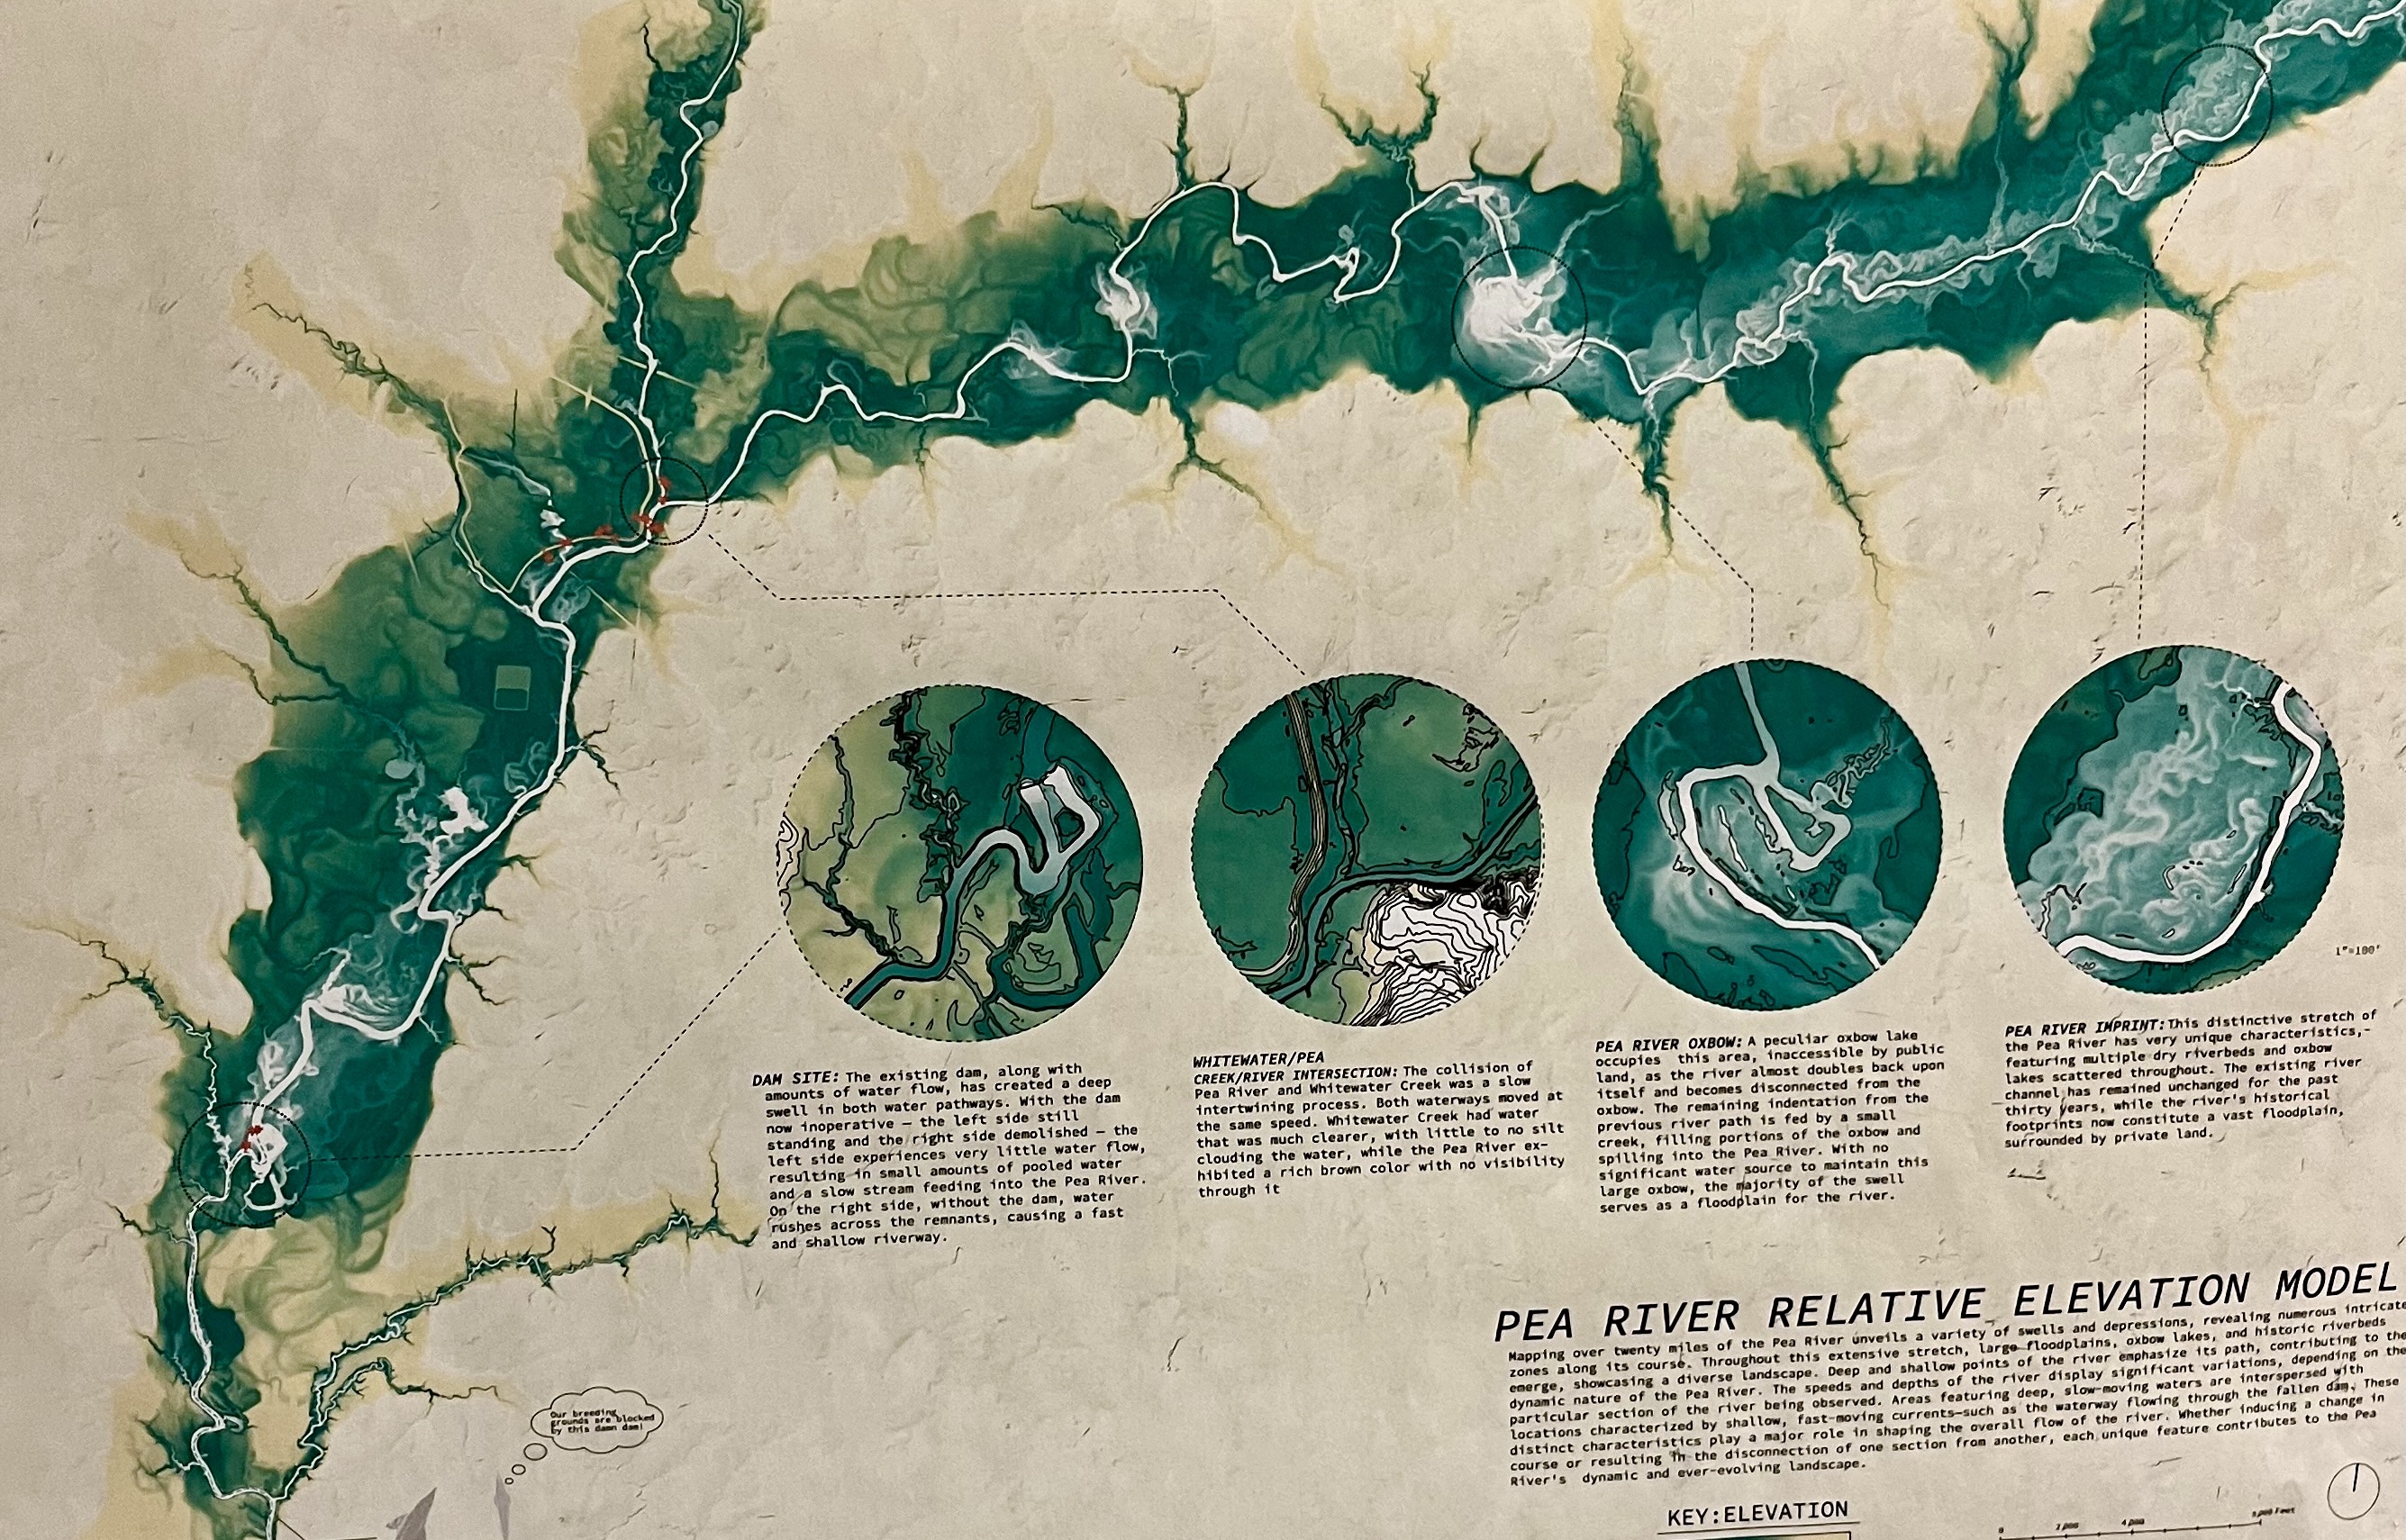 A map of the Pea River